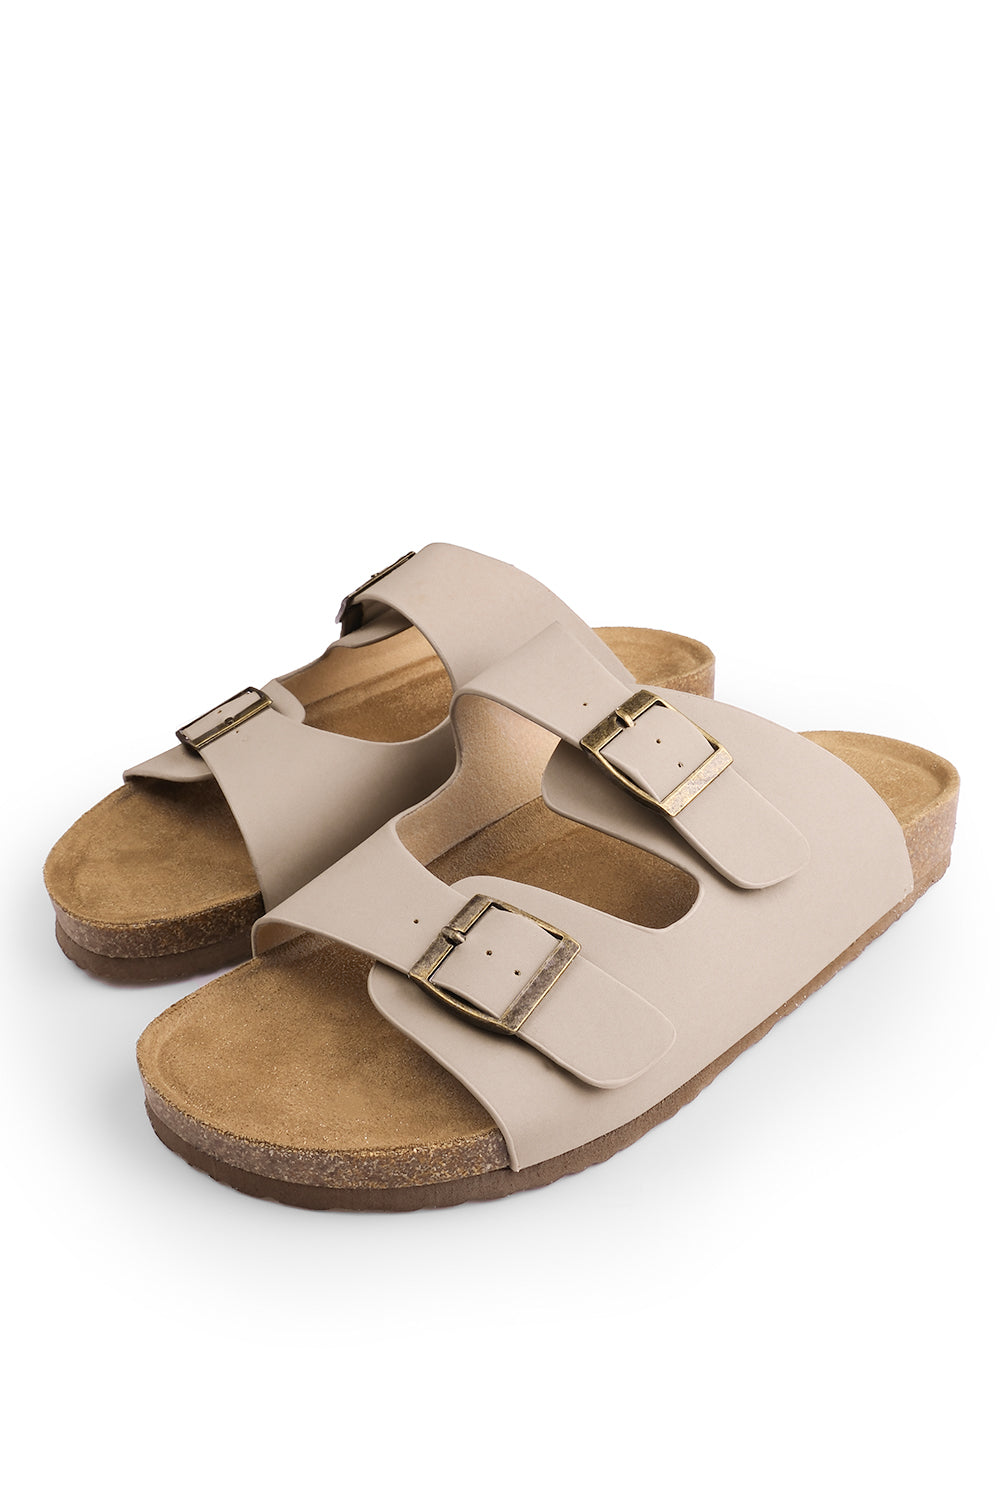 WILLOW TWO STRAP FLAT SANDALS WITH BUCKLE DETAIL IN CAMEL NUBUCK